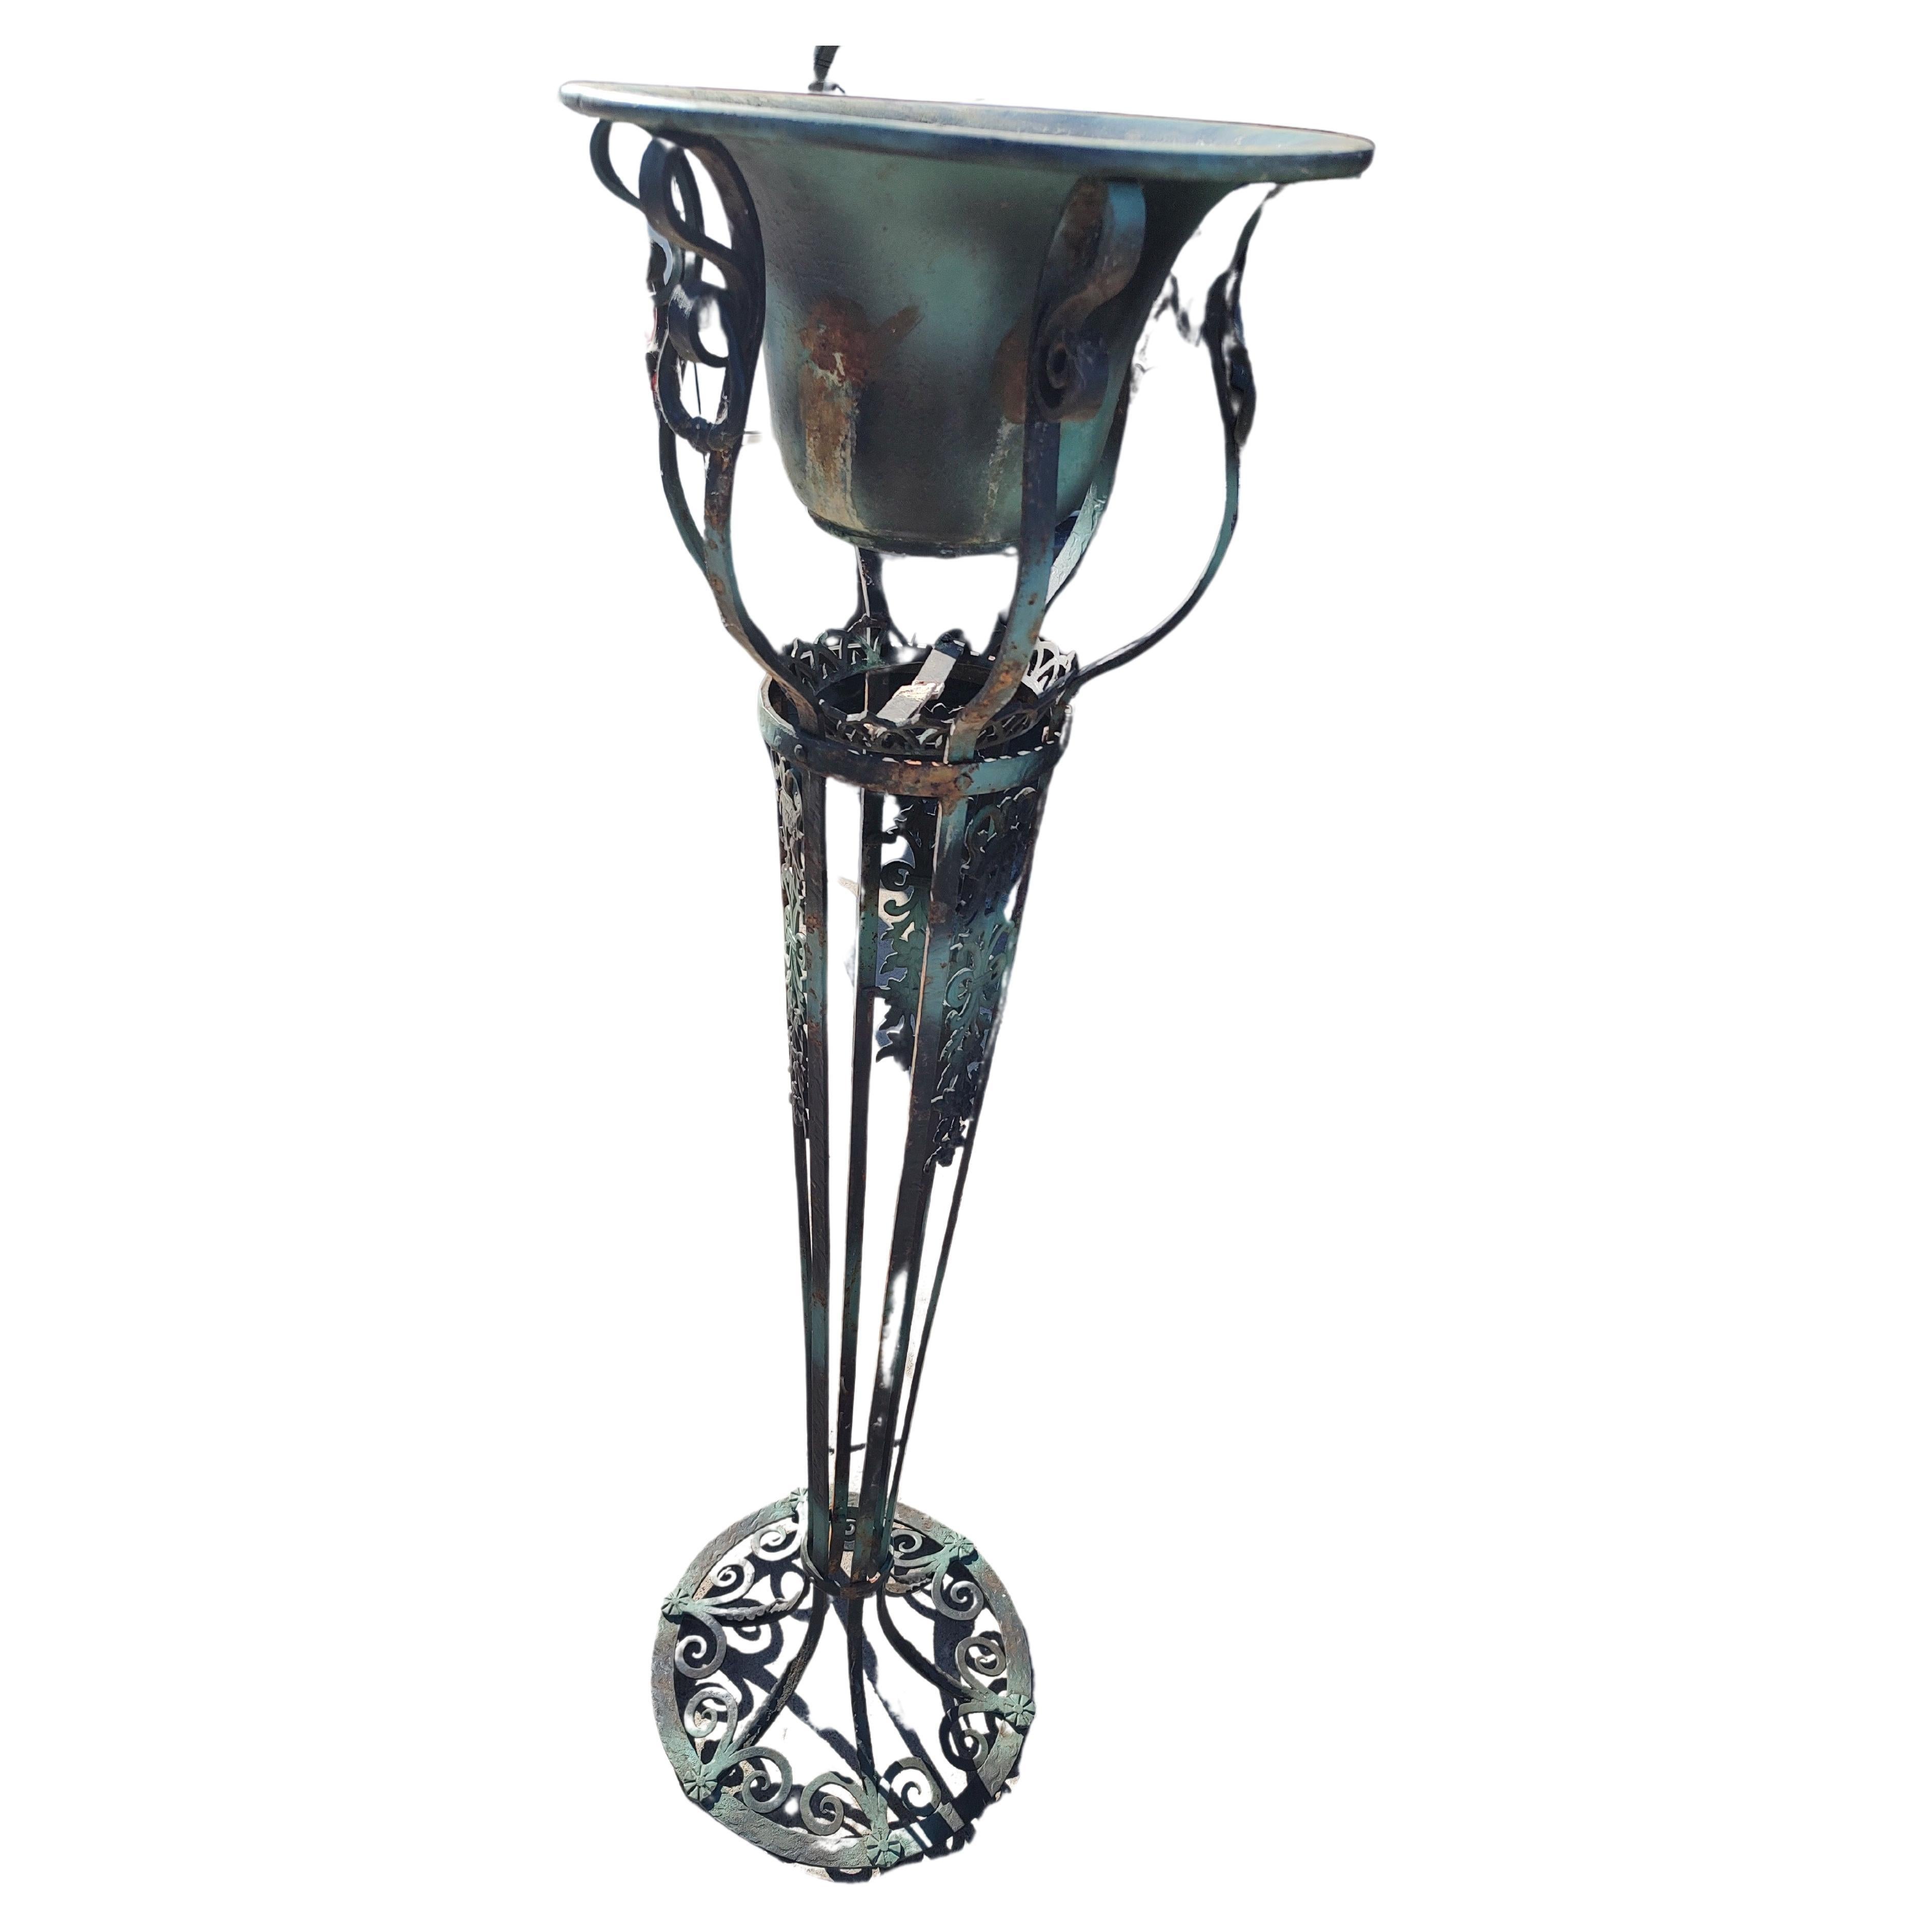 Fantastic and tall iron with copper pot plant stand. Almost 5ft tall with a base of 17inches this stand stands alone or almost. It's grande in its appearance and with its adornment this piece is set apart from the others.. High Quality and excellent